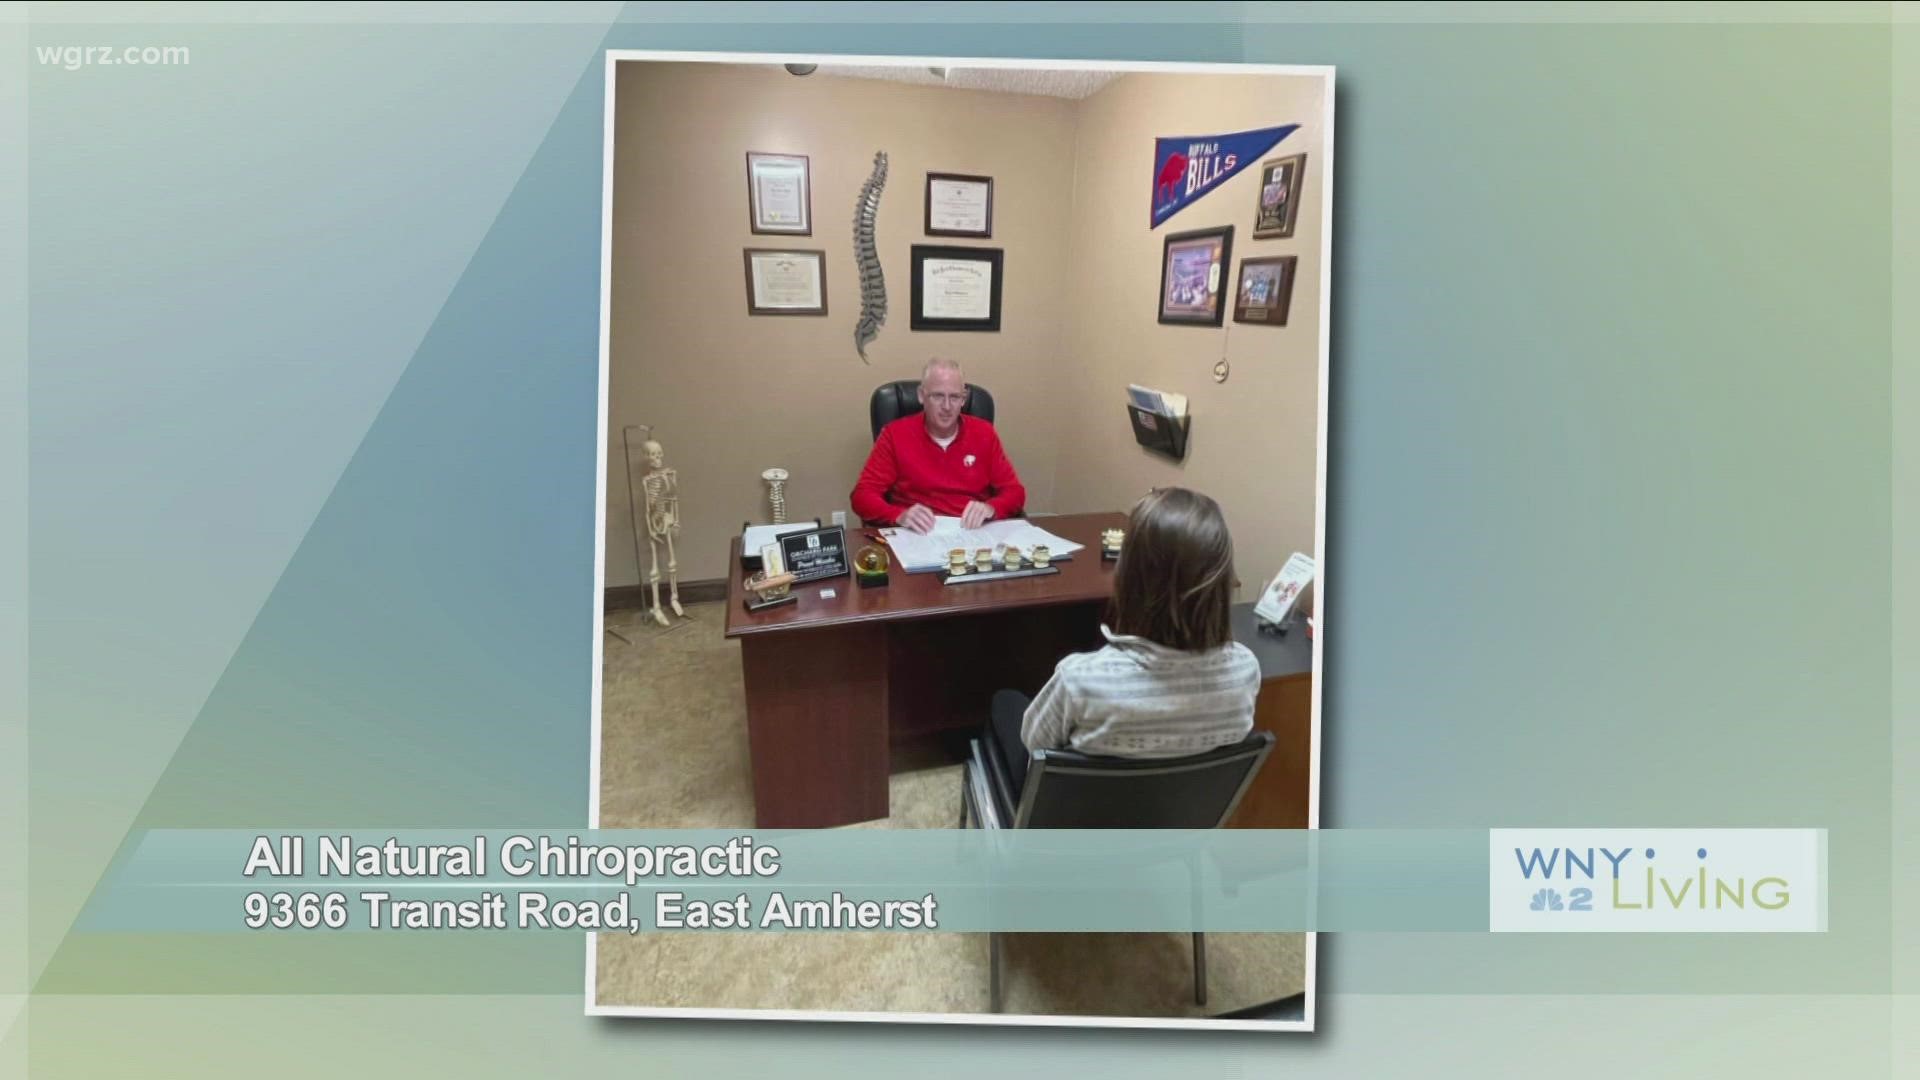 WNY Living - March 26 - All Natural Chiropractic (THIS VIDEO IS SPONSORED BY ALL NATURAL CHIROPRACTIC)